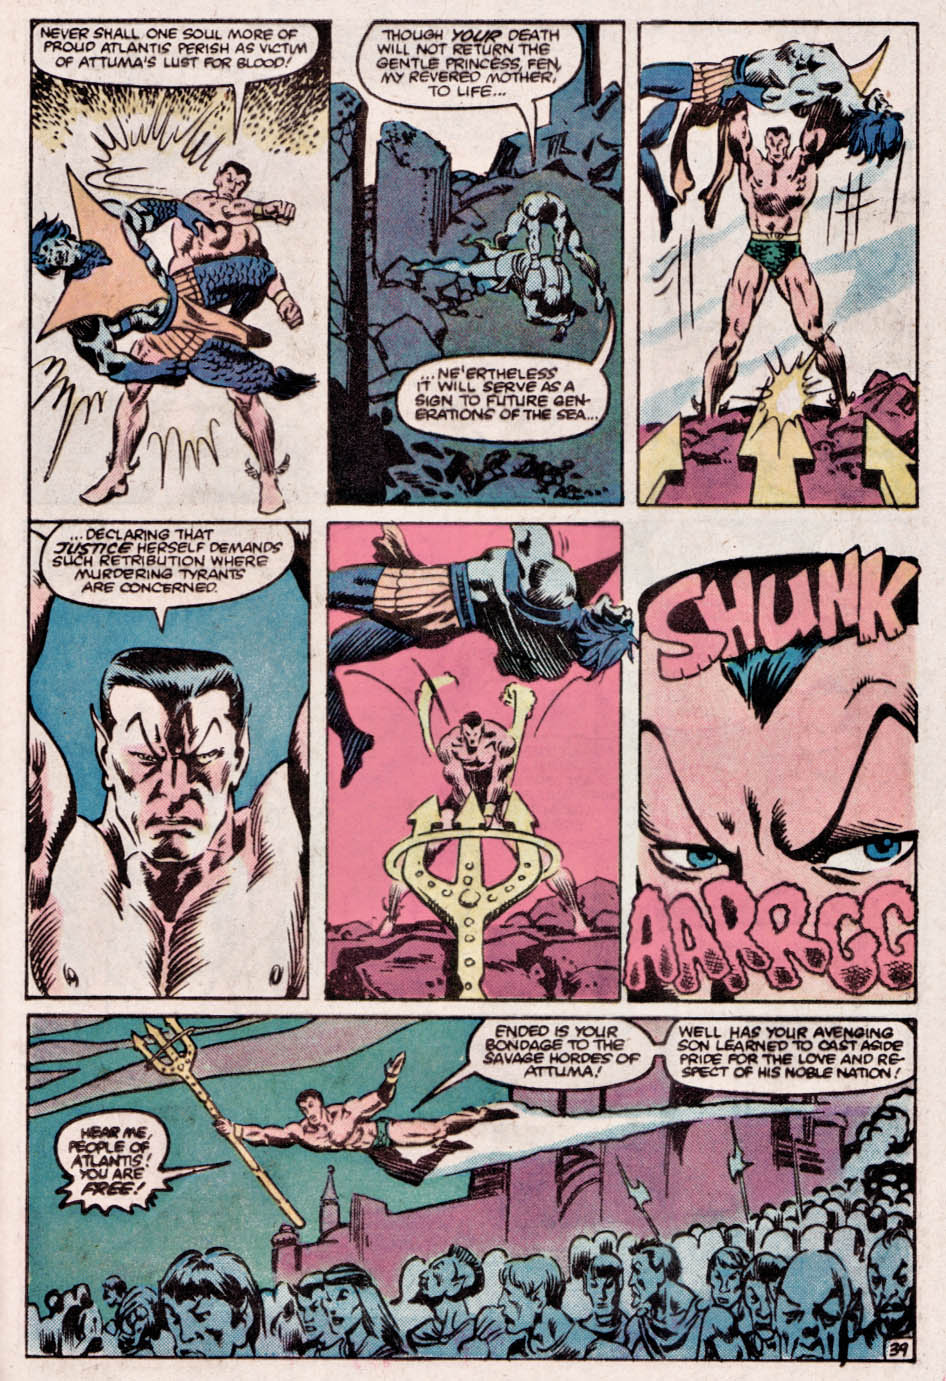 What If? (1977) issue 41 - The Sub-mariner had saved Atlantis from its destiny - Page 39